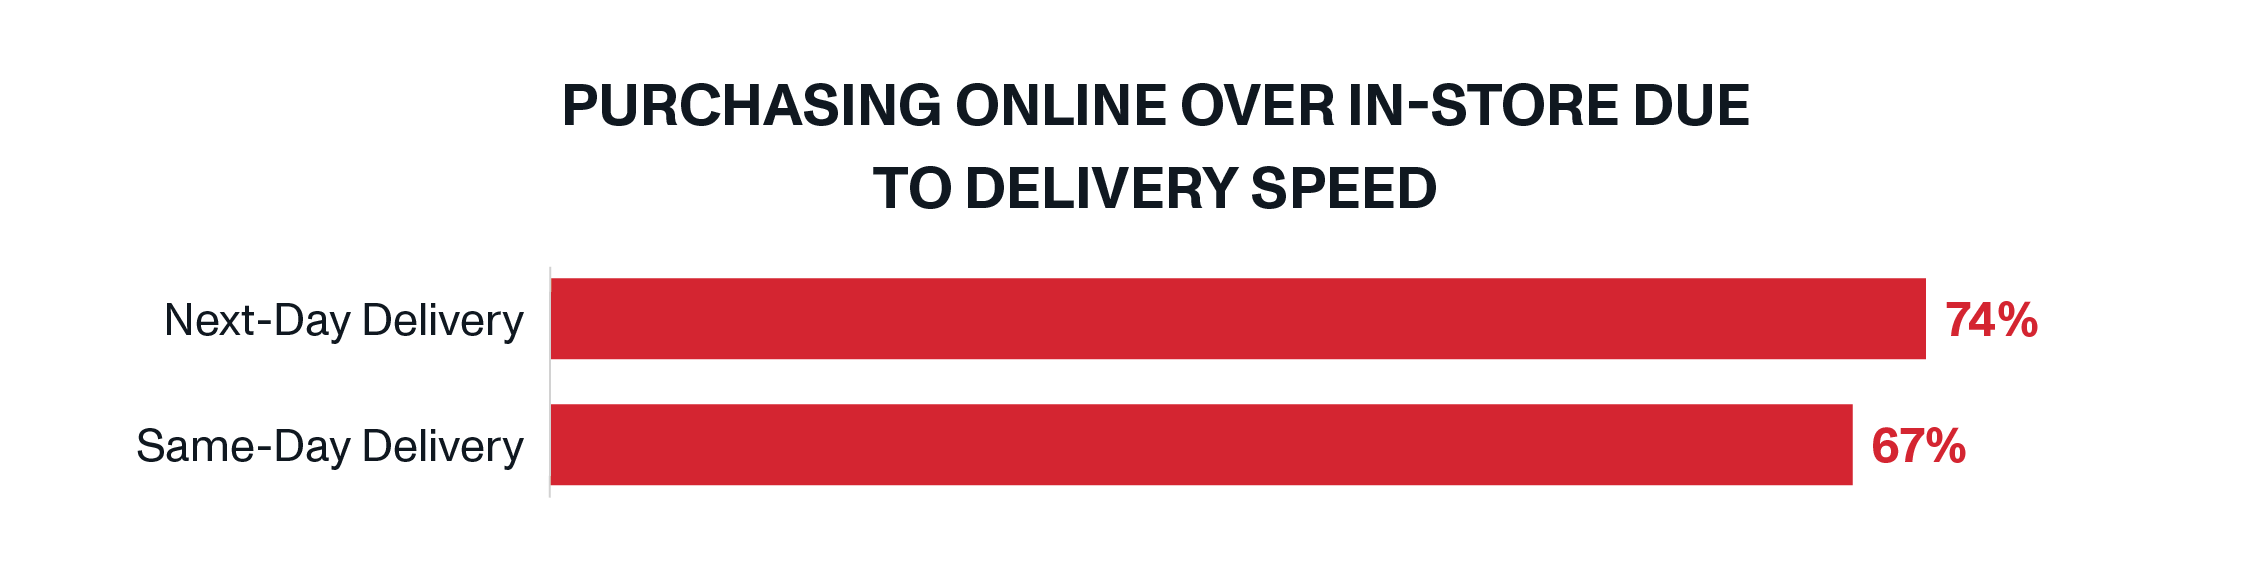 Shoppers also chose one retailer over another due to next-day (71%) and same-day (67%) delivery.